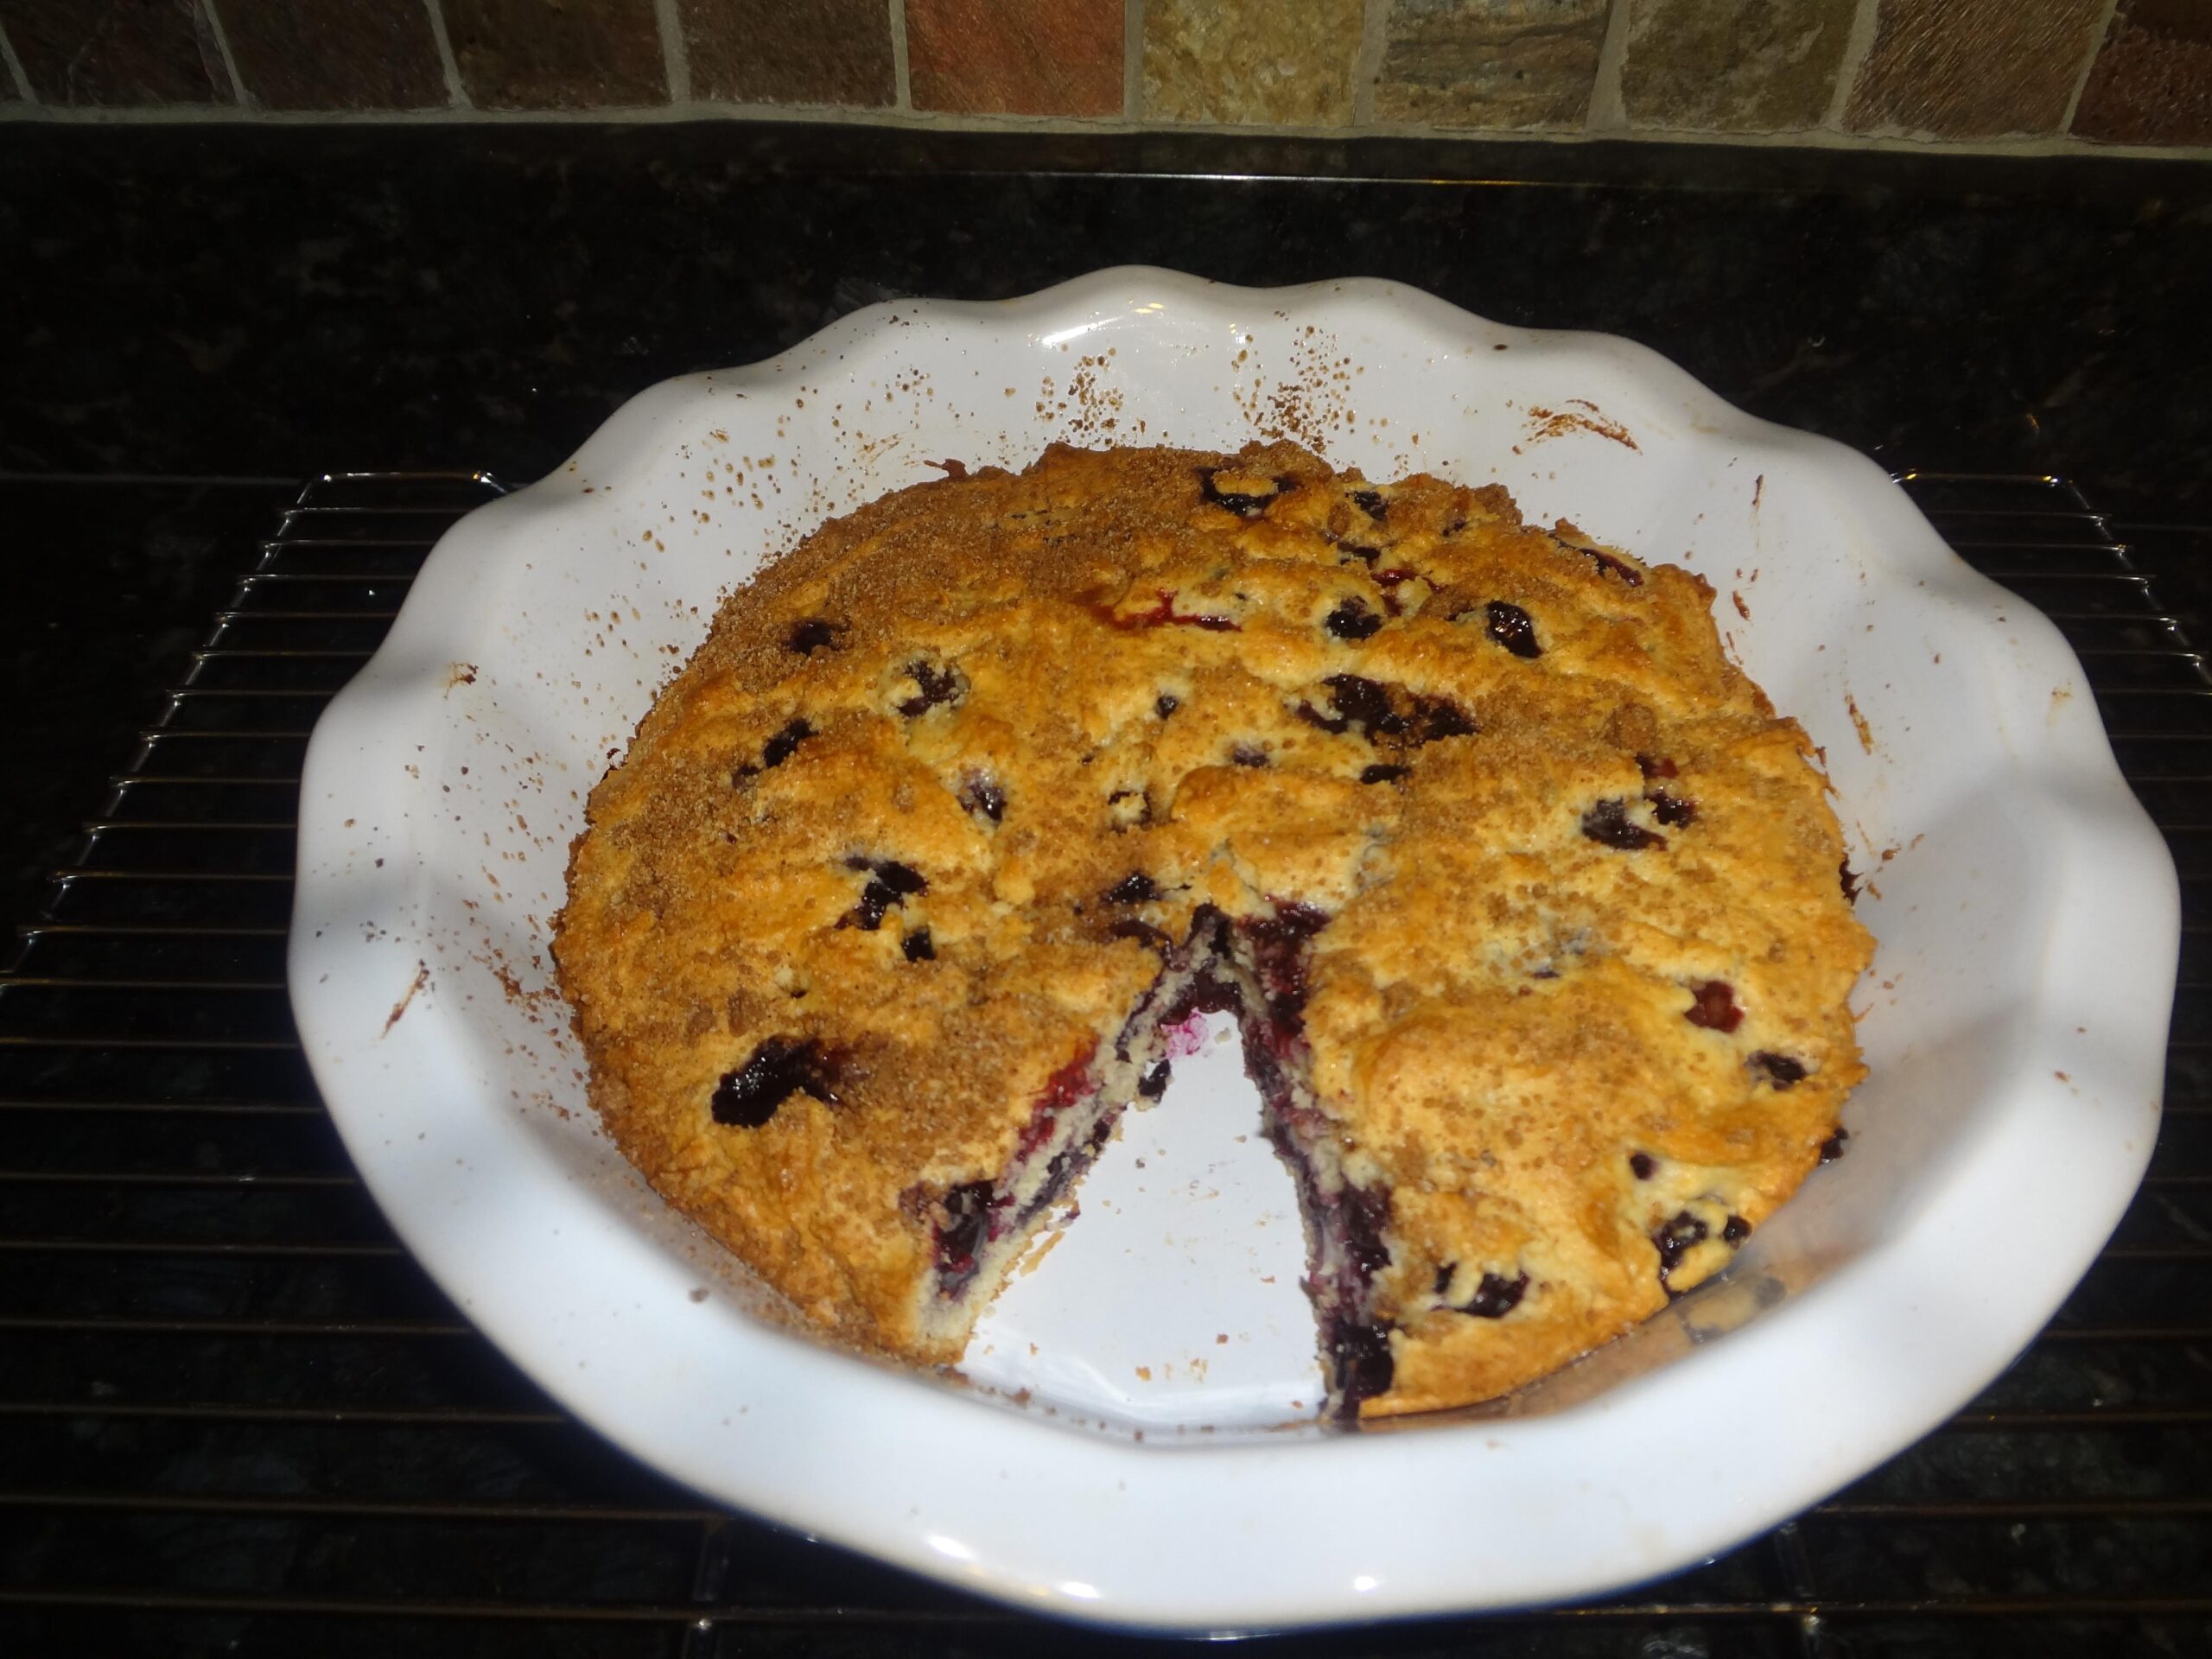  A slice of heaven with blueberries on top!